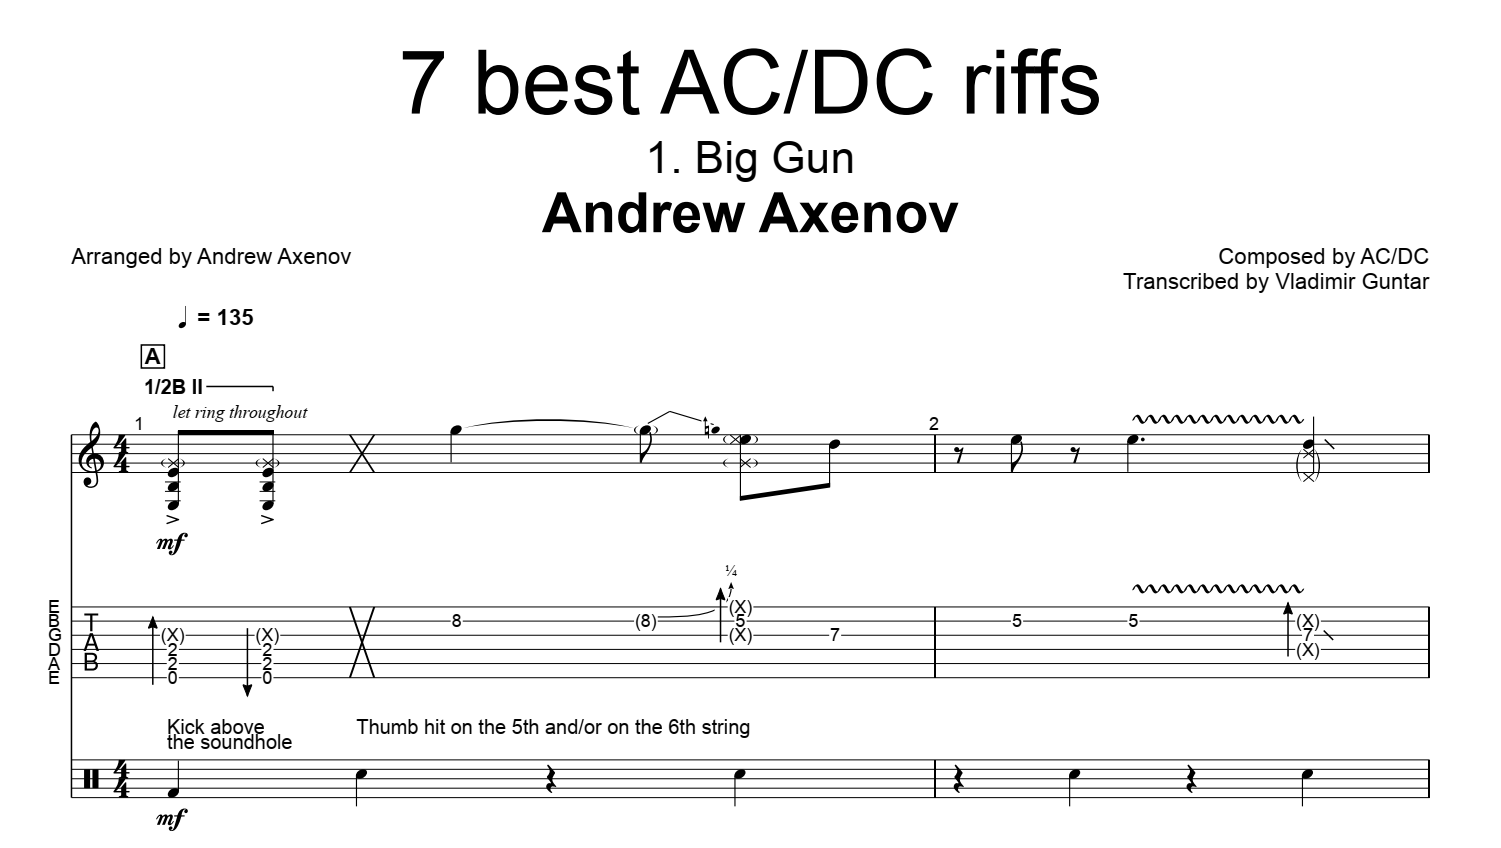 Slagskib Tilsætningsstof Foresee 7 percussion riffs AC / DC for guitar. Guitar sheet music and tabs.